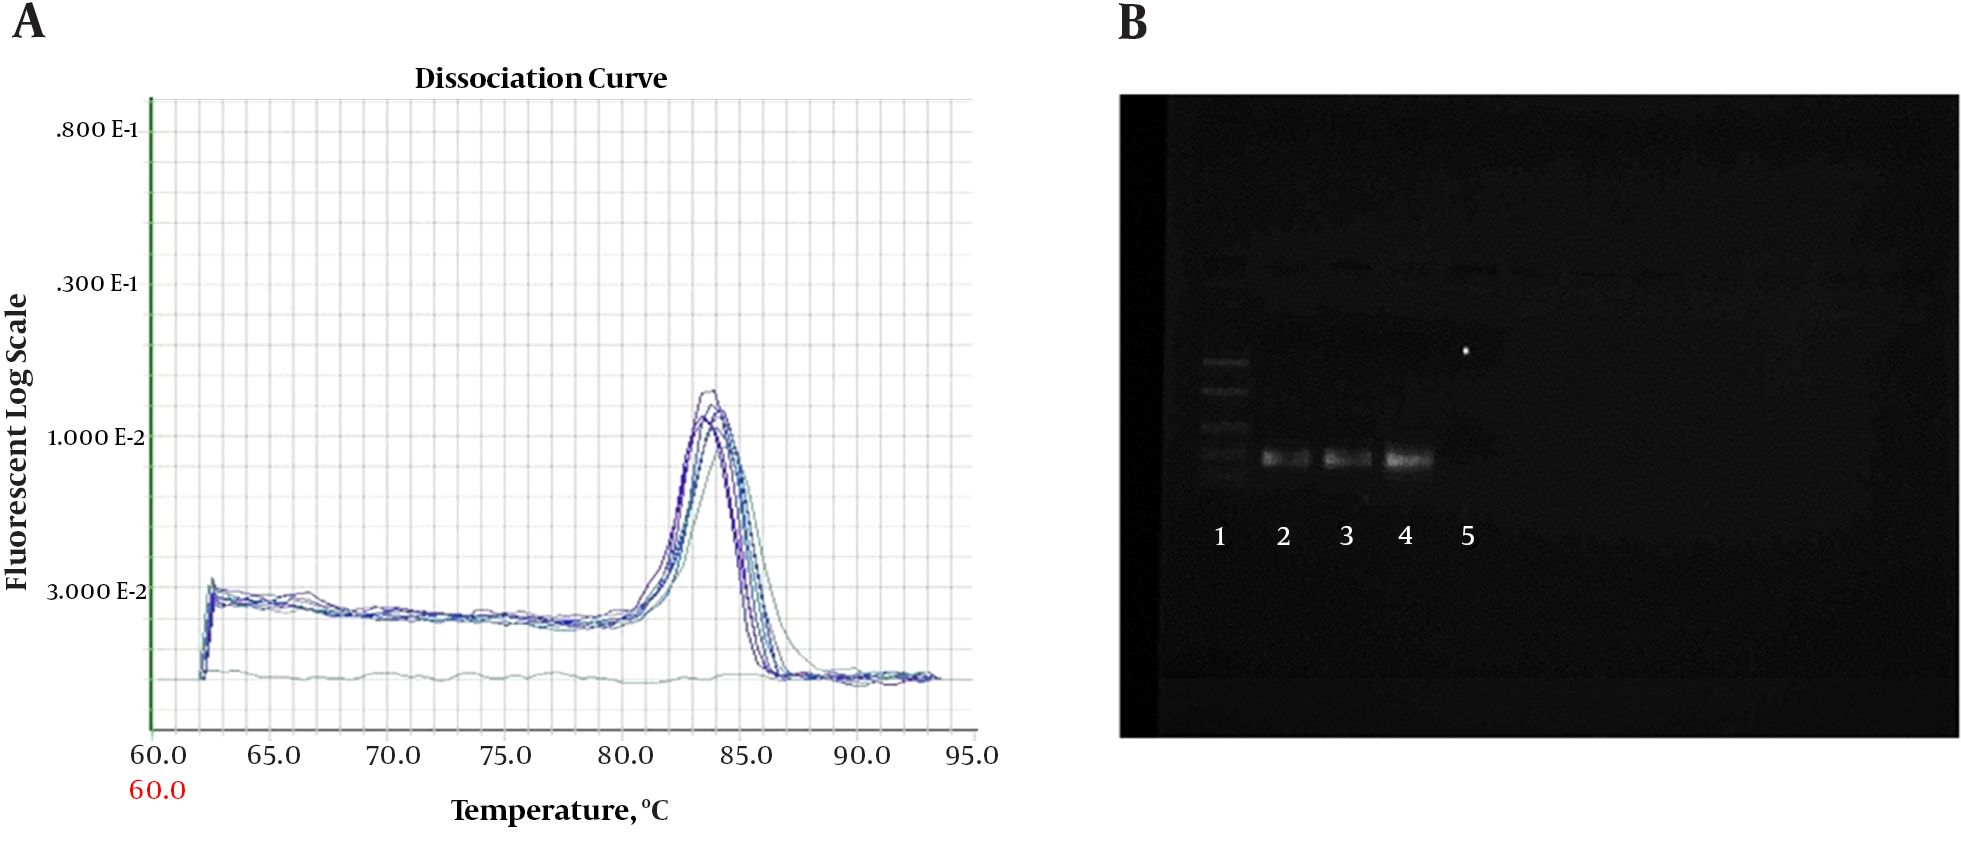 A, Melting curve for β-actin PCR products. Curves showing positive real-time PCR amplification of the β-actin gene; B, Gel electrophoresis for PCR products. Amplification was detectable in the samples run in lanes 2 to 4, with product corresponding to a 161-bp band, Lane 1 was the 100-bp ladder, and lane 5 contained the non-template control with DNase/RNase-free water.